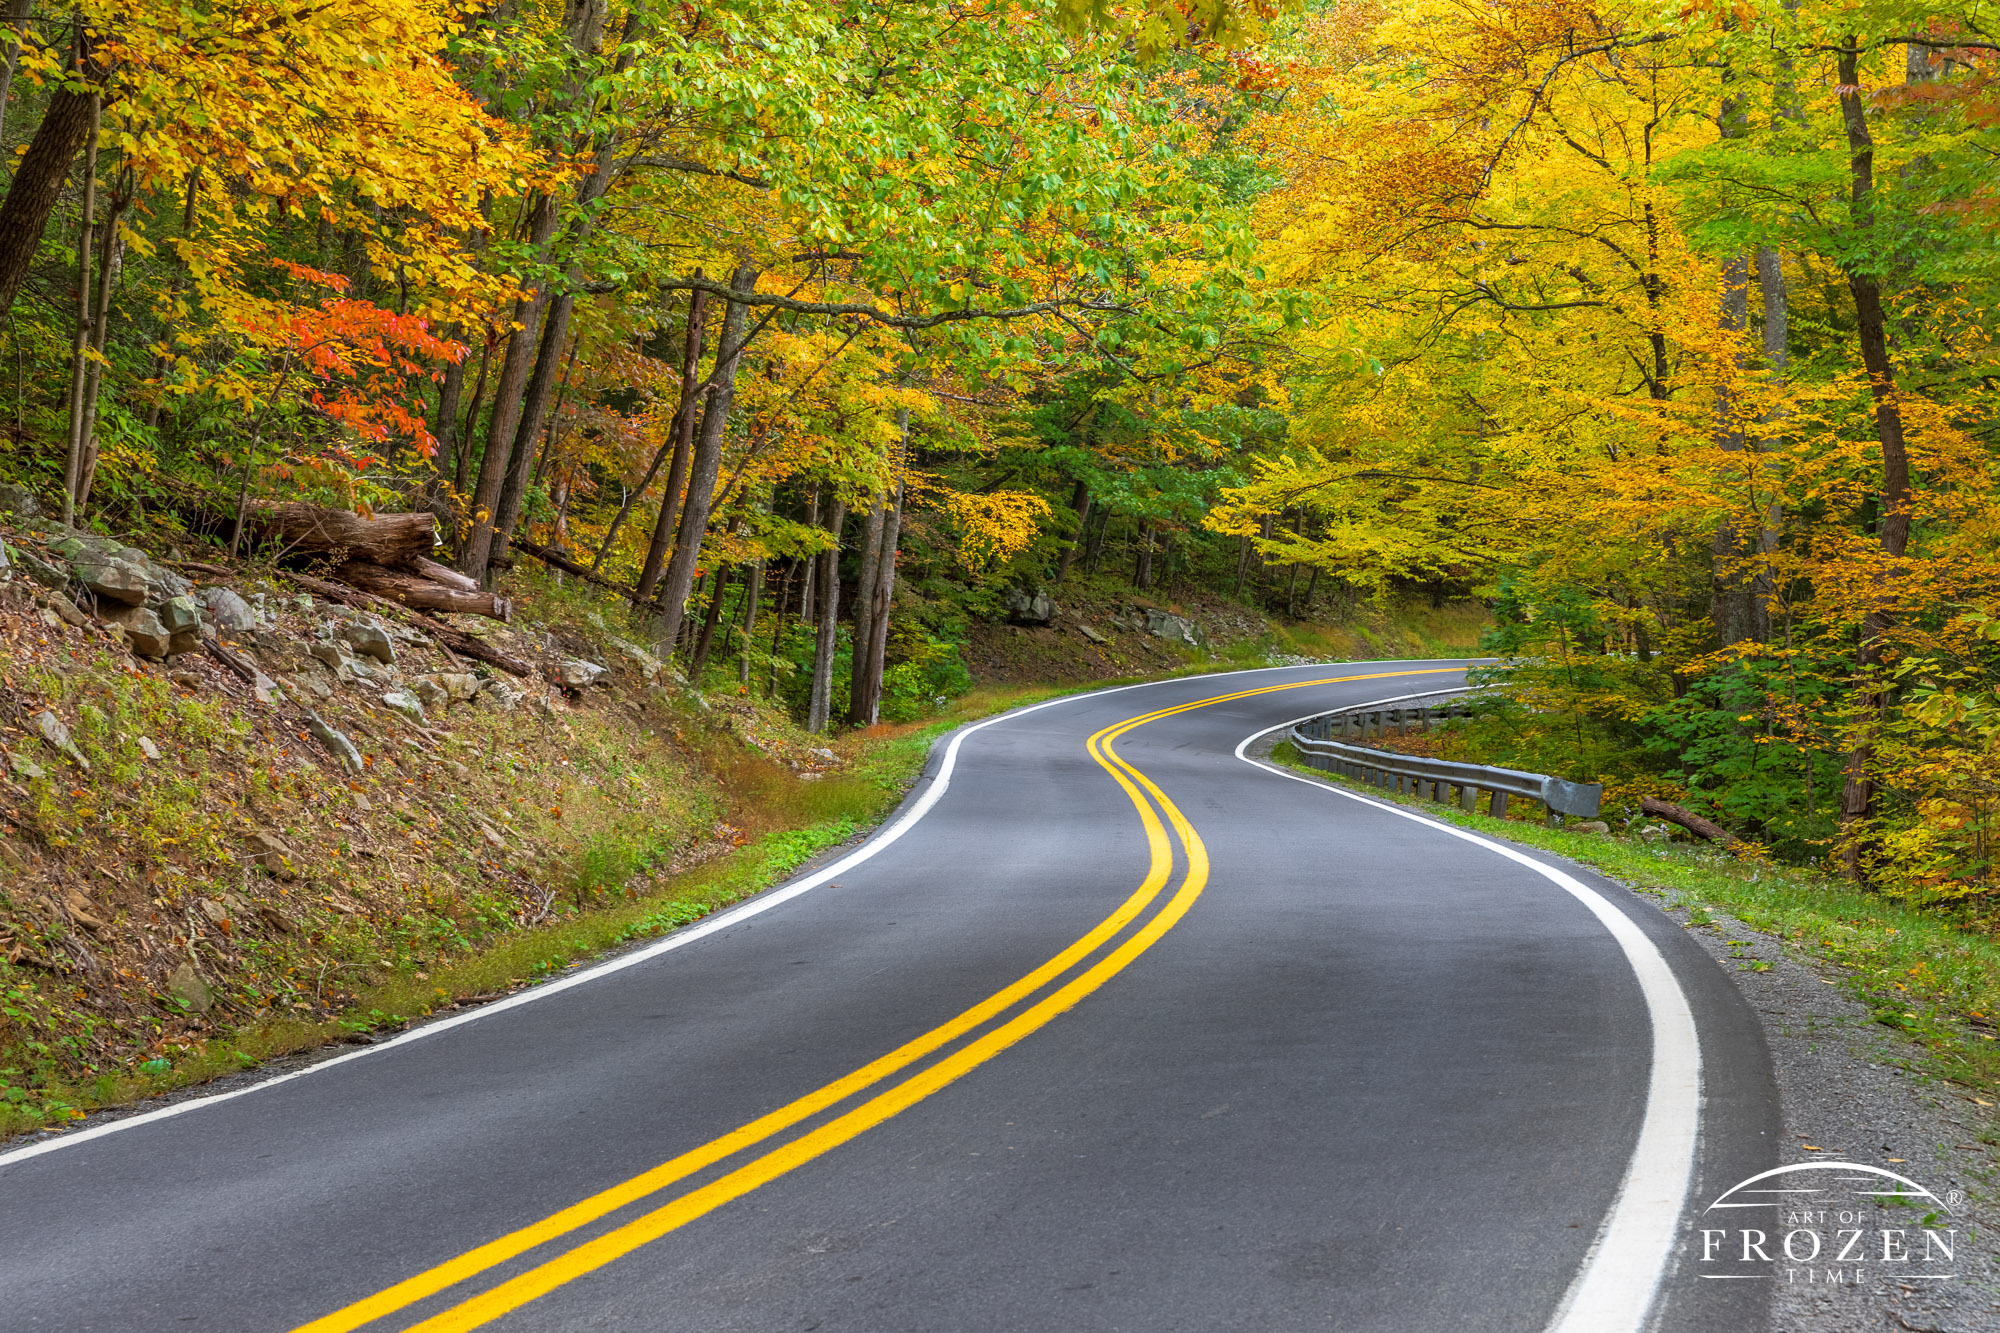 West Virginia Fine Art Photography featuring the Mountaineer Highway as it forms soothing serpentine curves through the fall color.